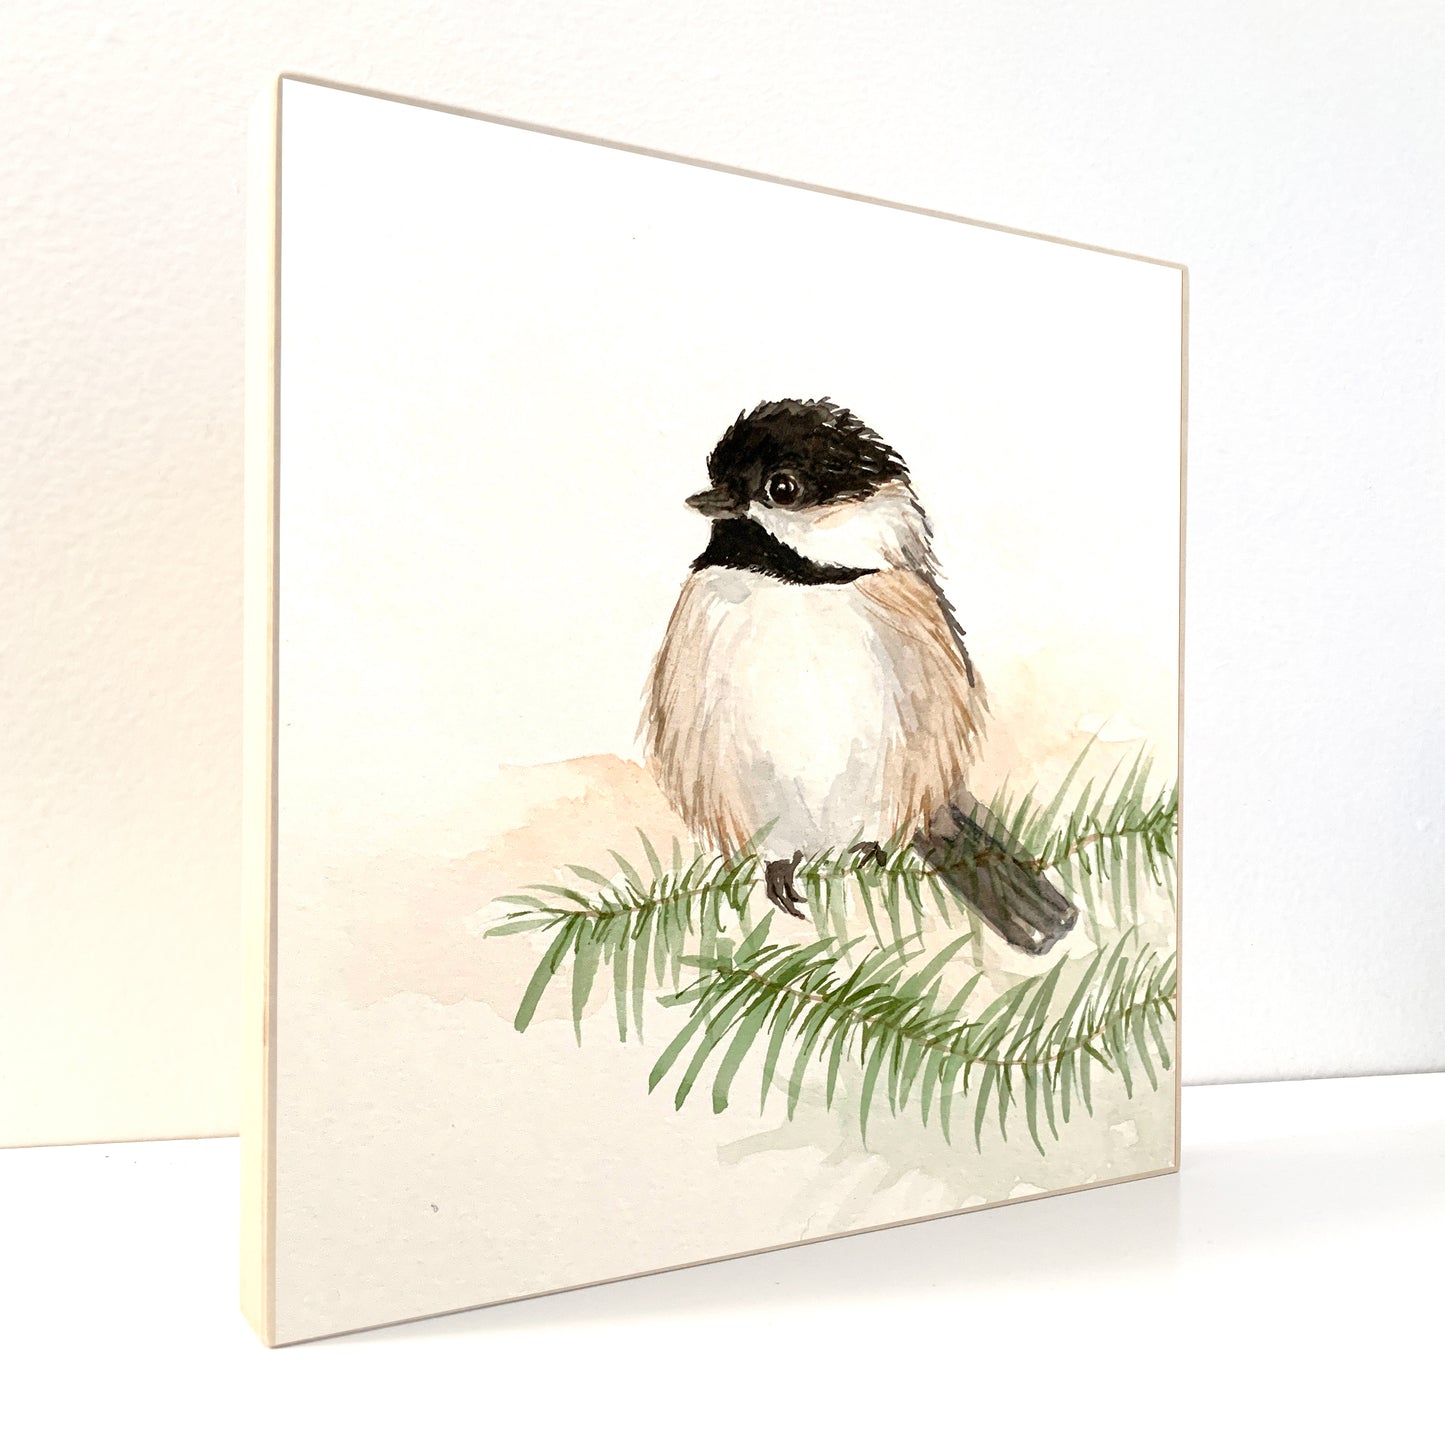 Chickadee Bird - Watercolor on Woodblock - Flamingo Shores - Original Art for Home Decor and Gifts